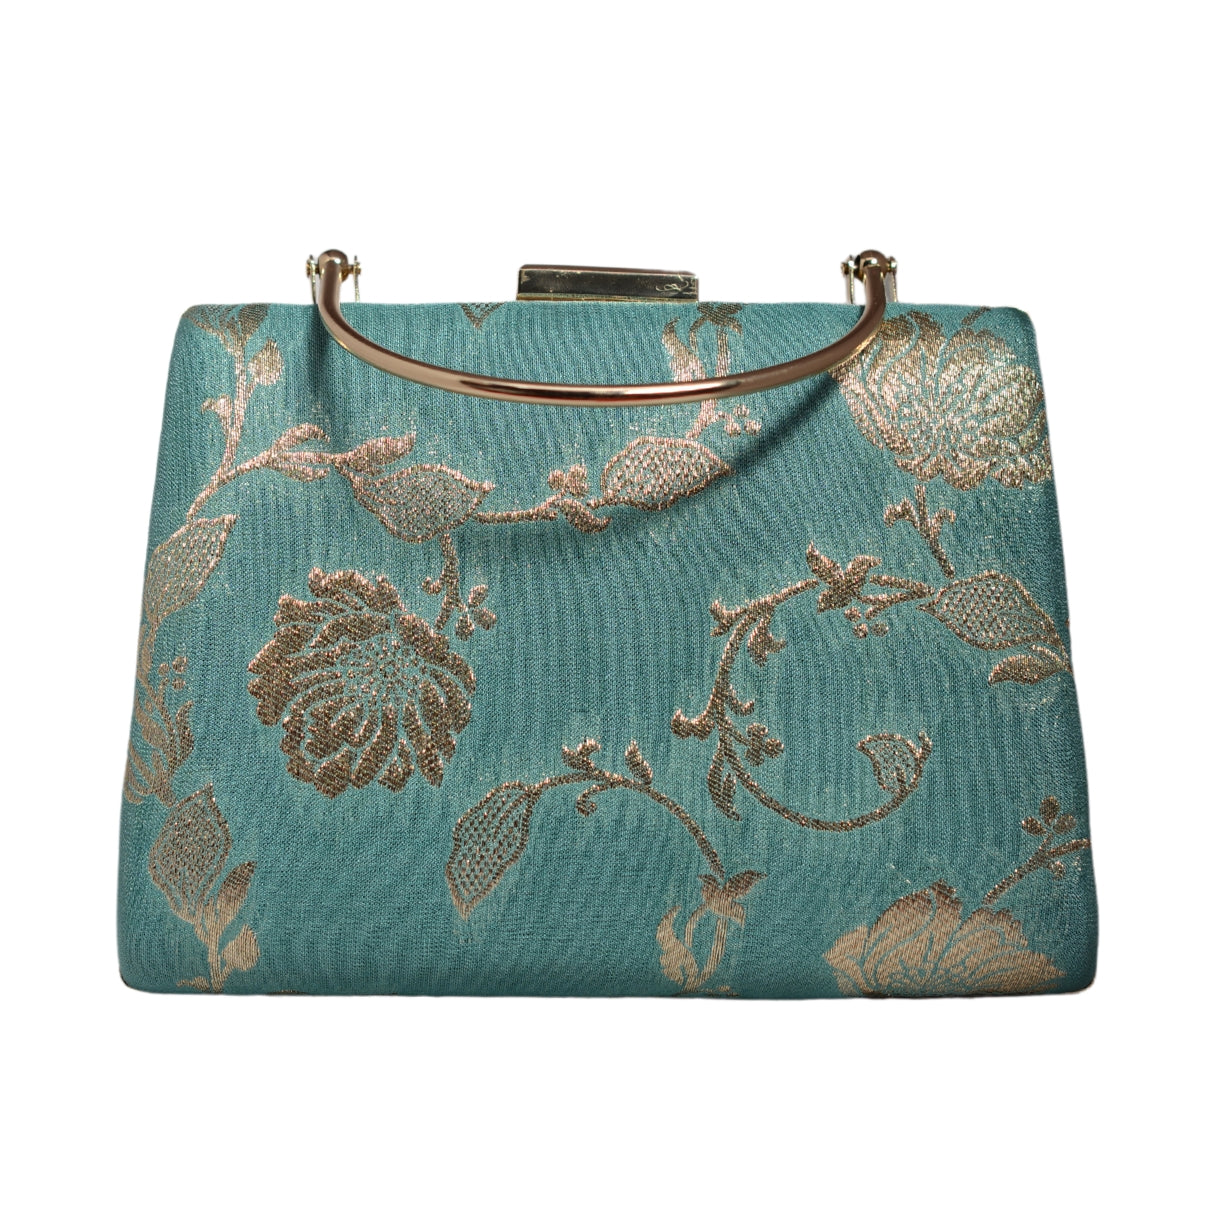 Blue And Golden Floral Brocade Fabric Clutch